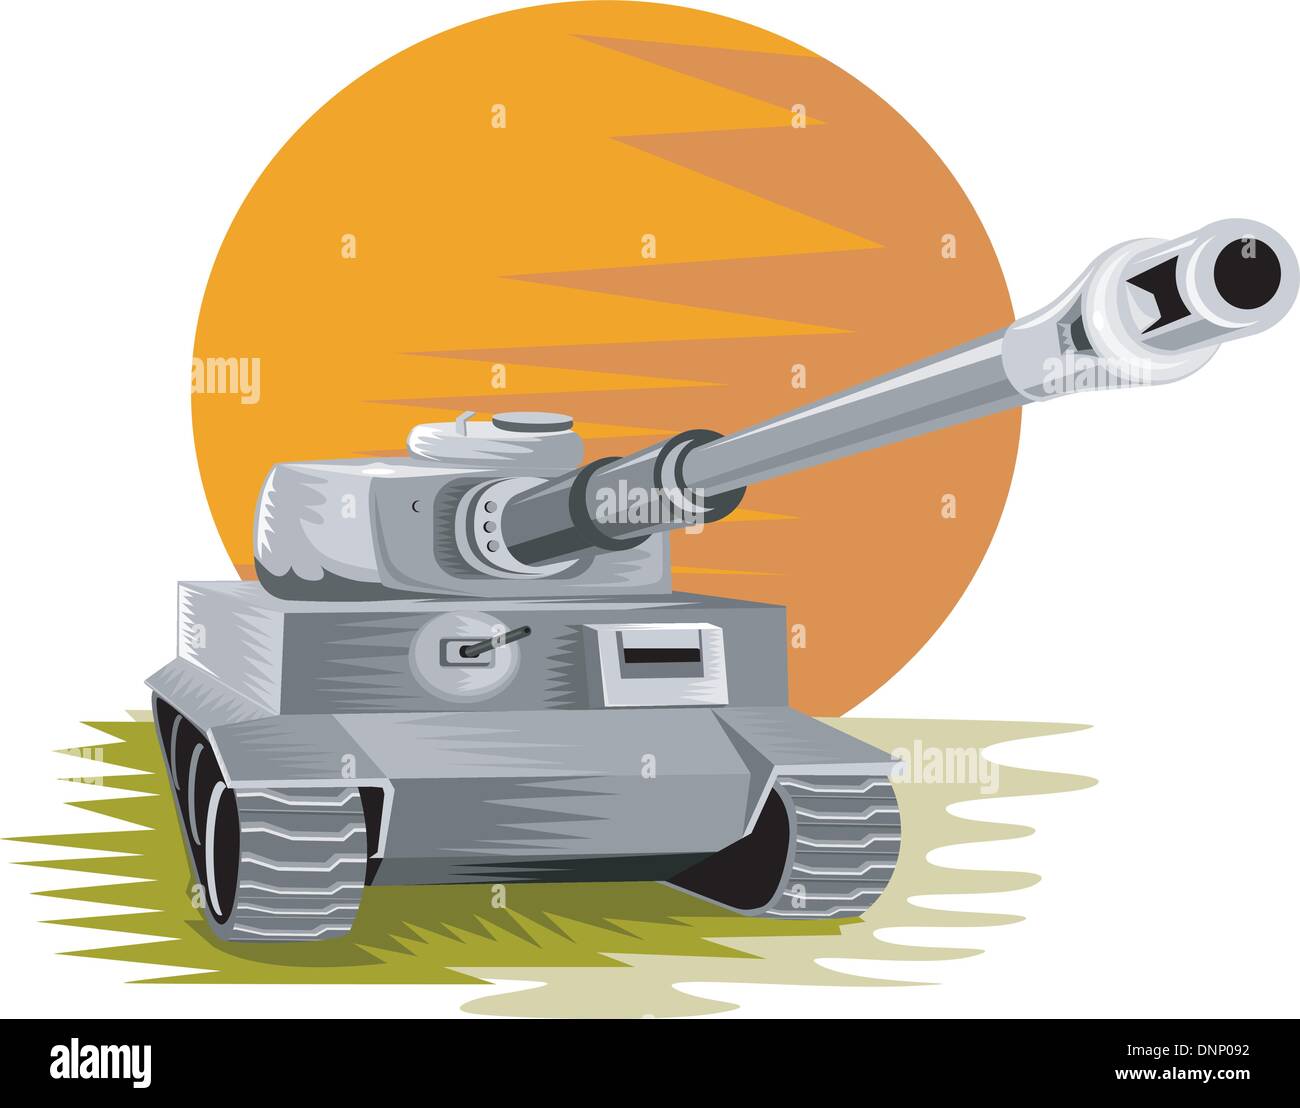 Illustration of a world war two german panzer battle tank done in retro style. Stock Vector